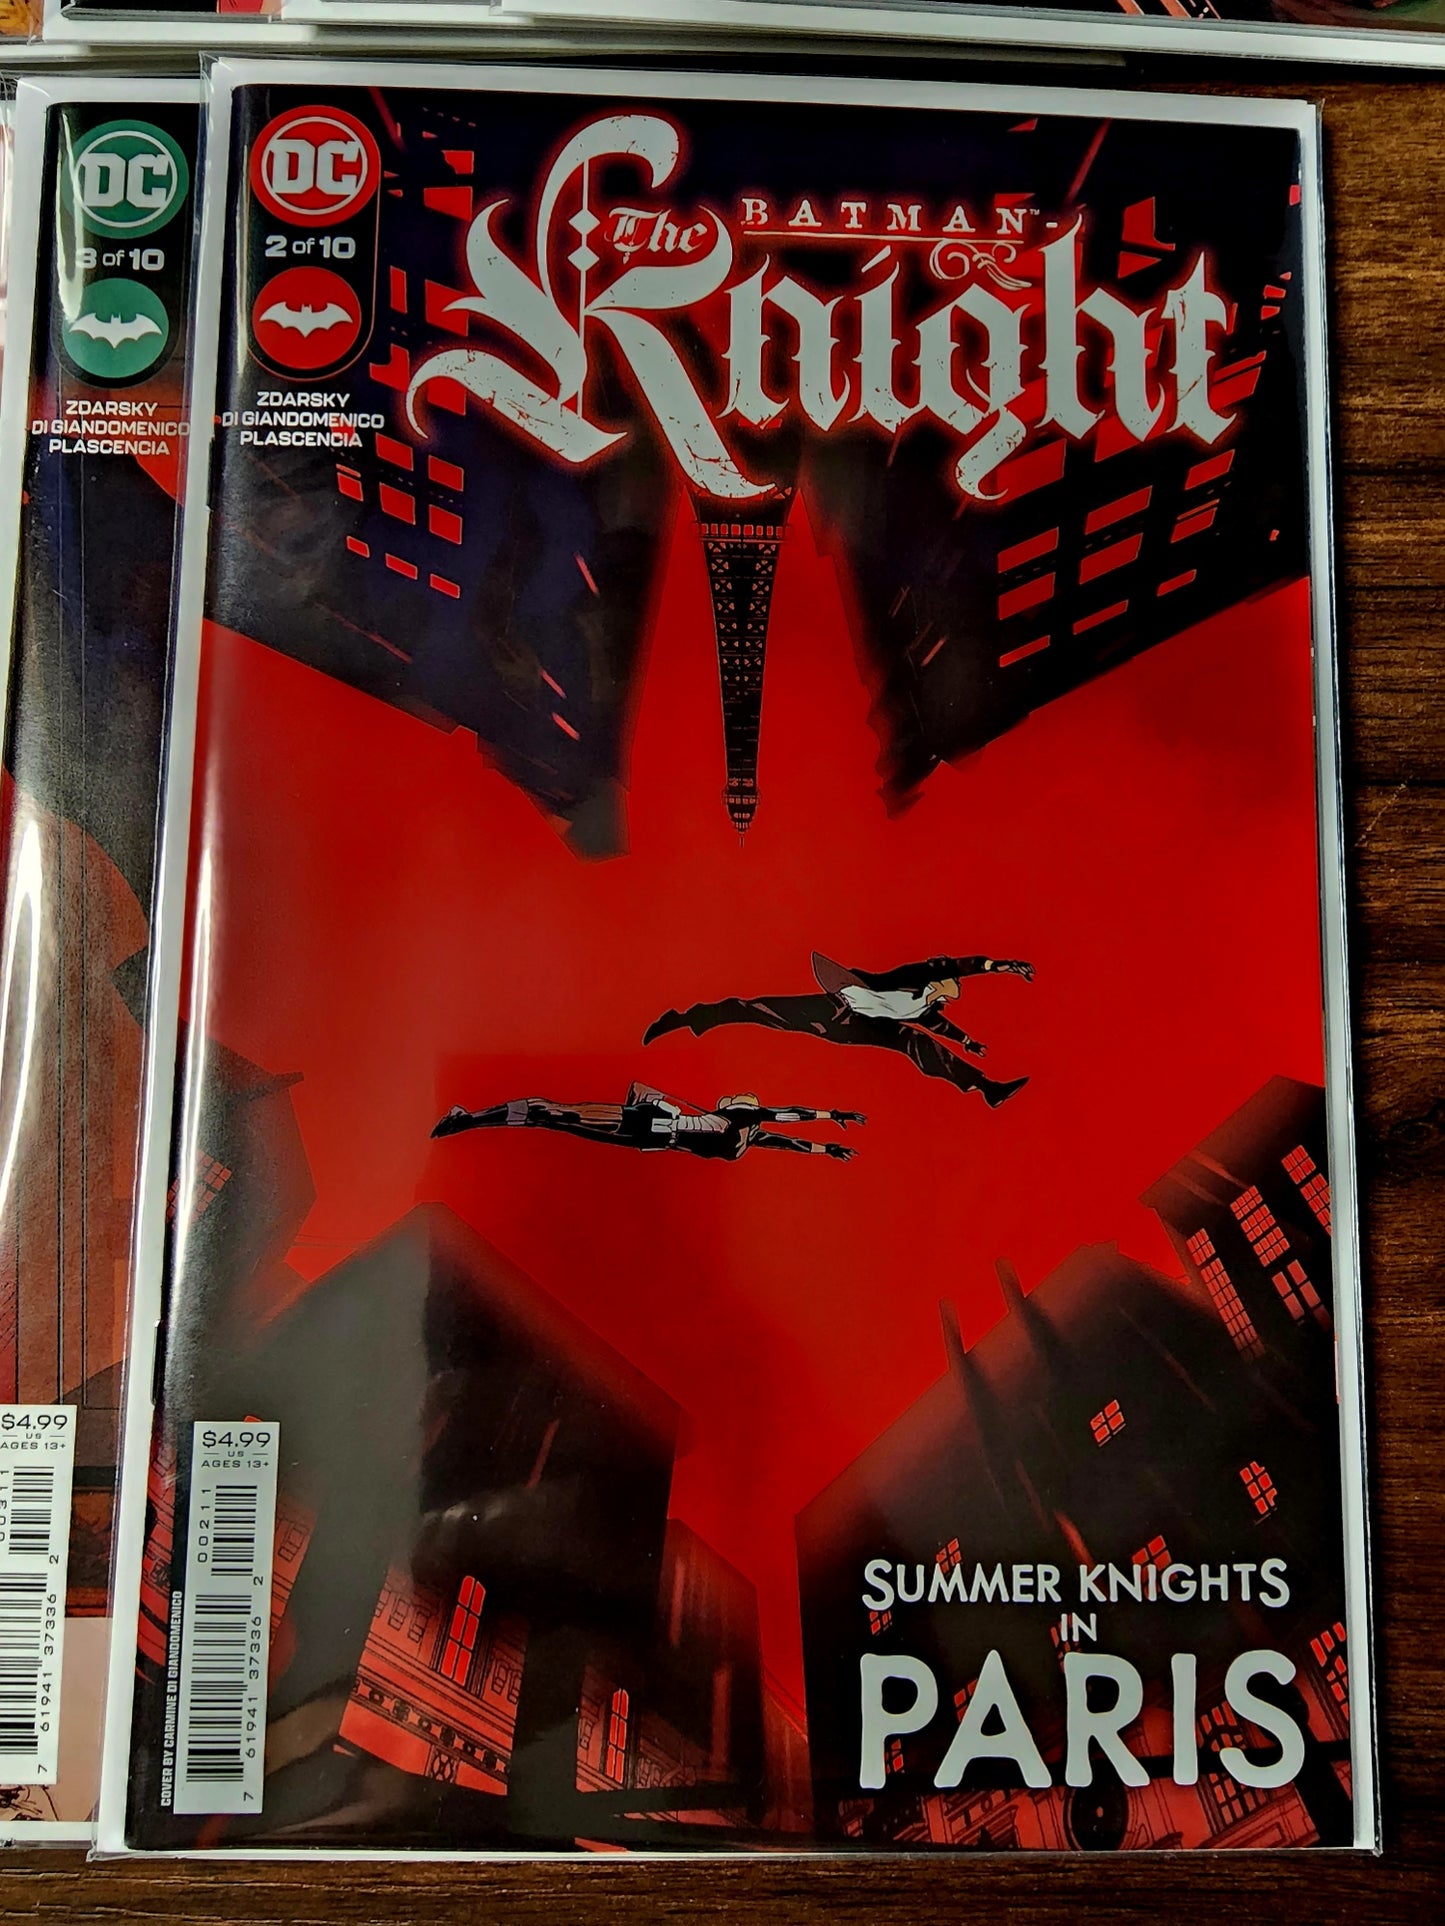 Batman: The Knight Complete Series (NM)